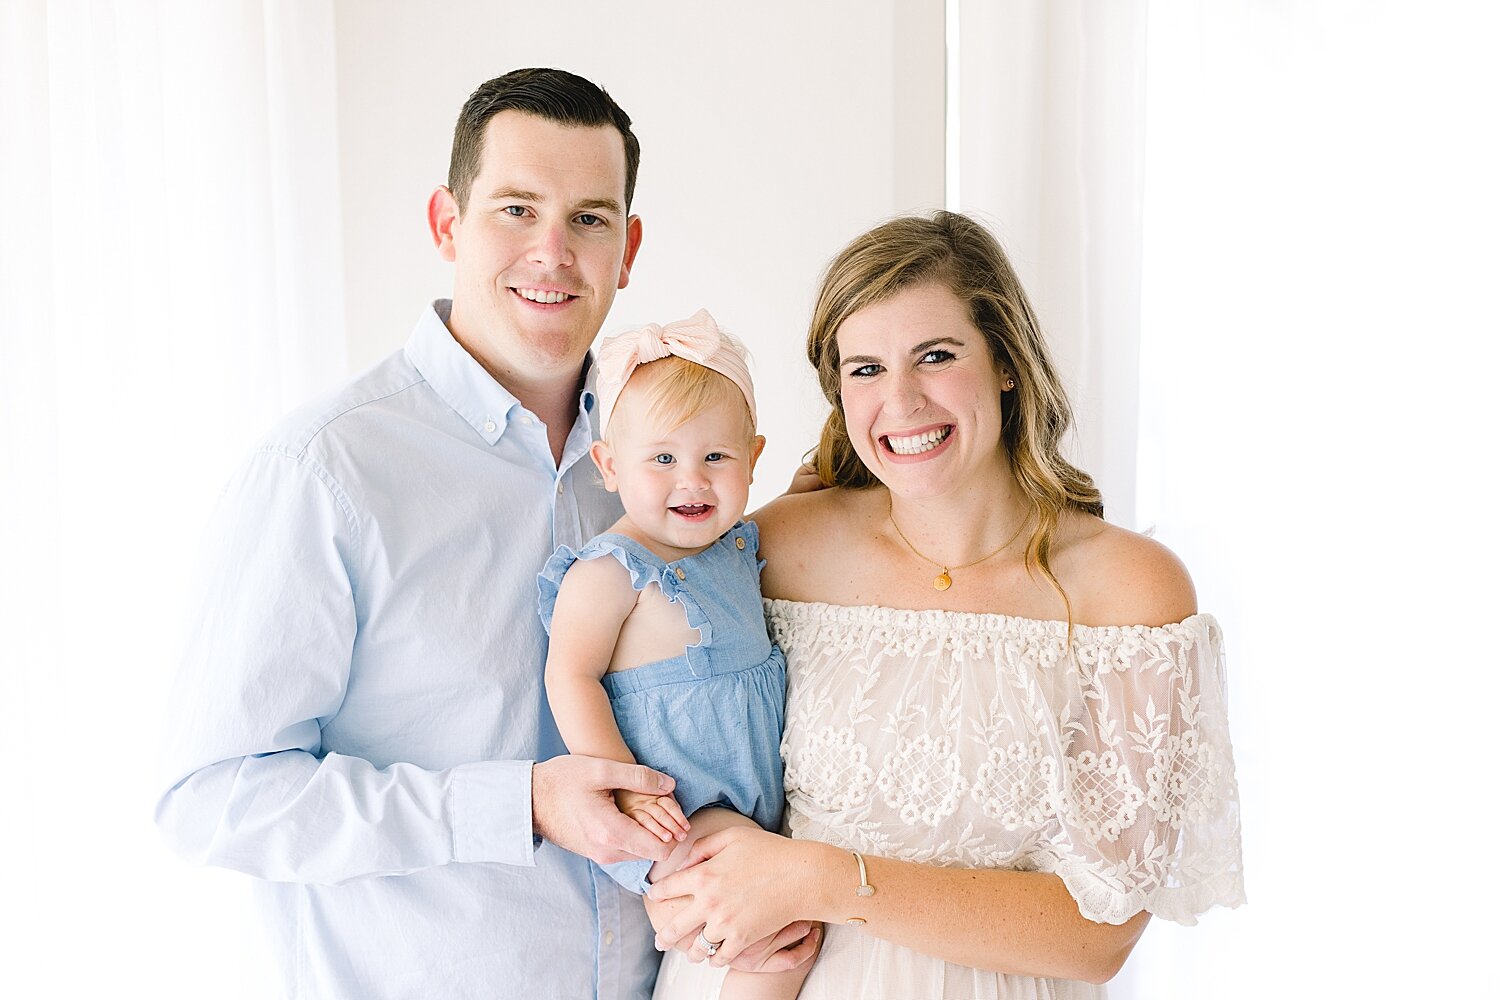 Family portrait in studio for baby's first birthday. Photo by Ambre Williams Photography.